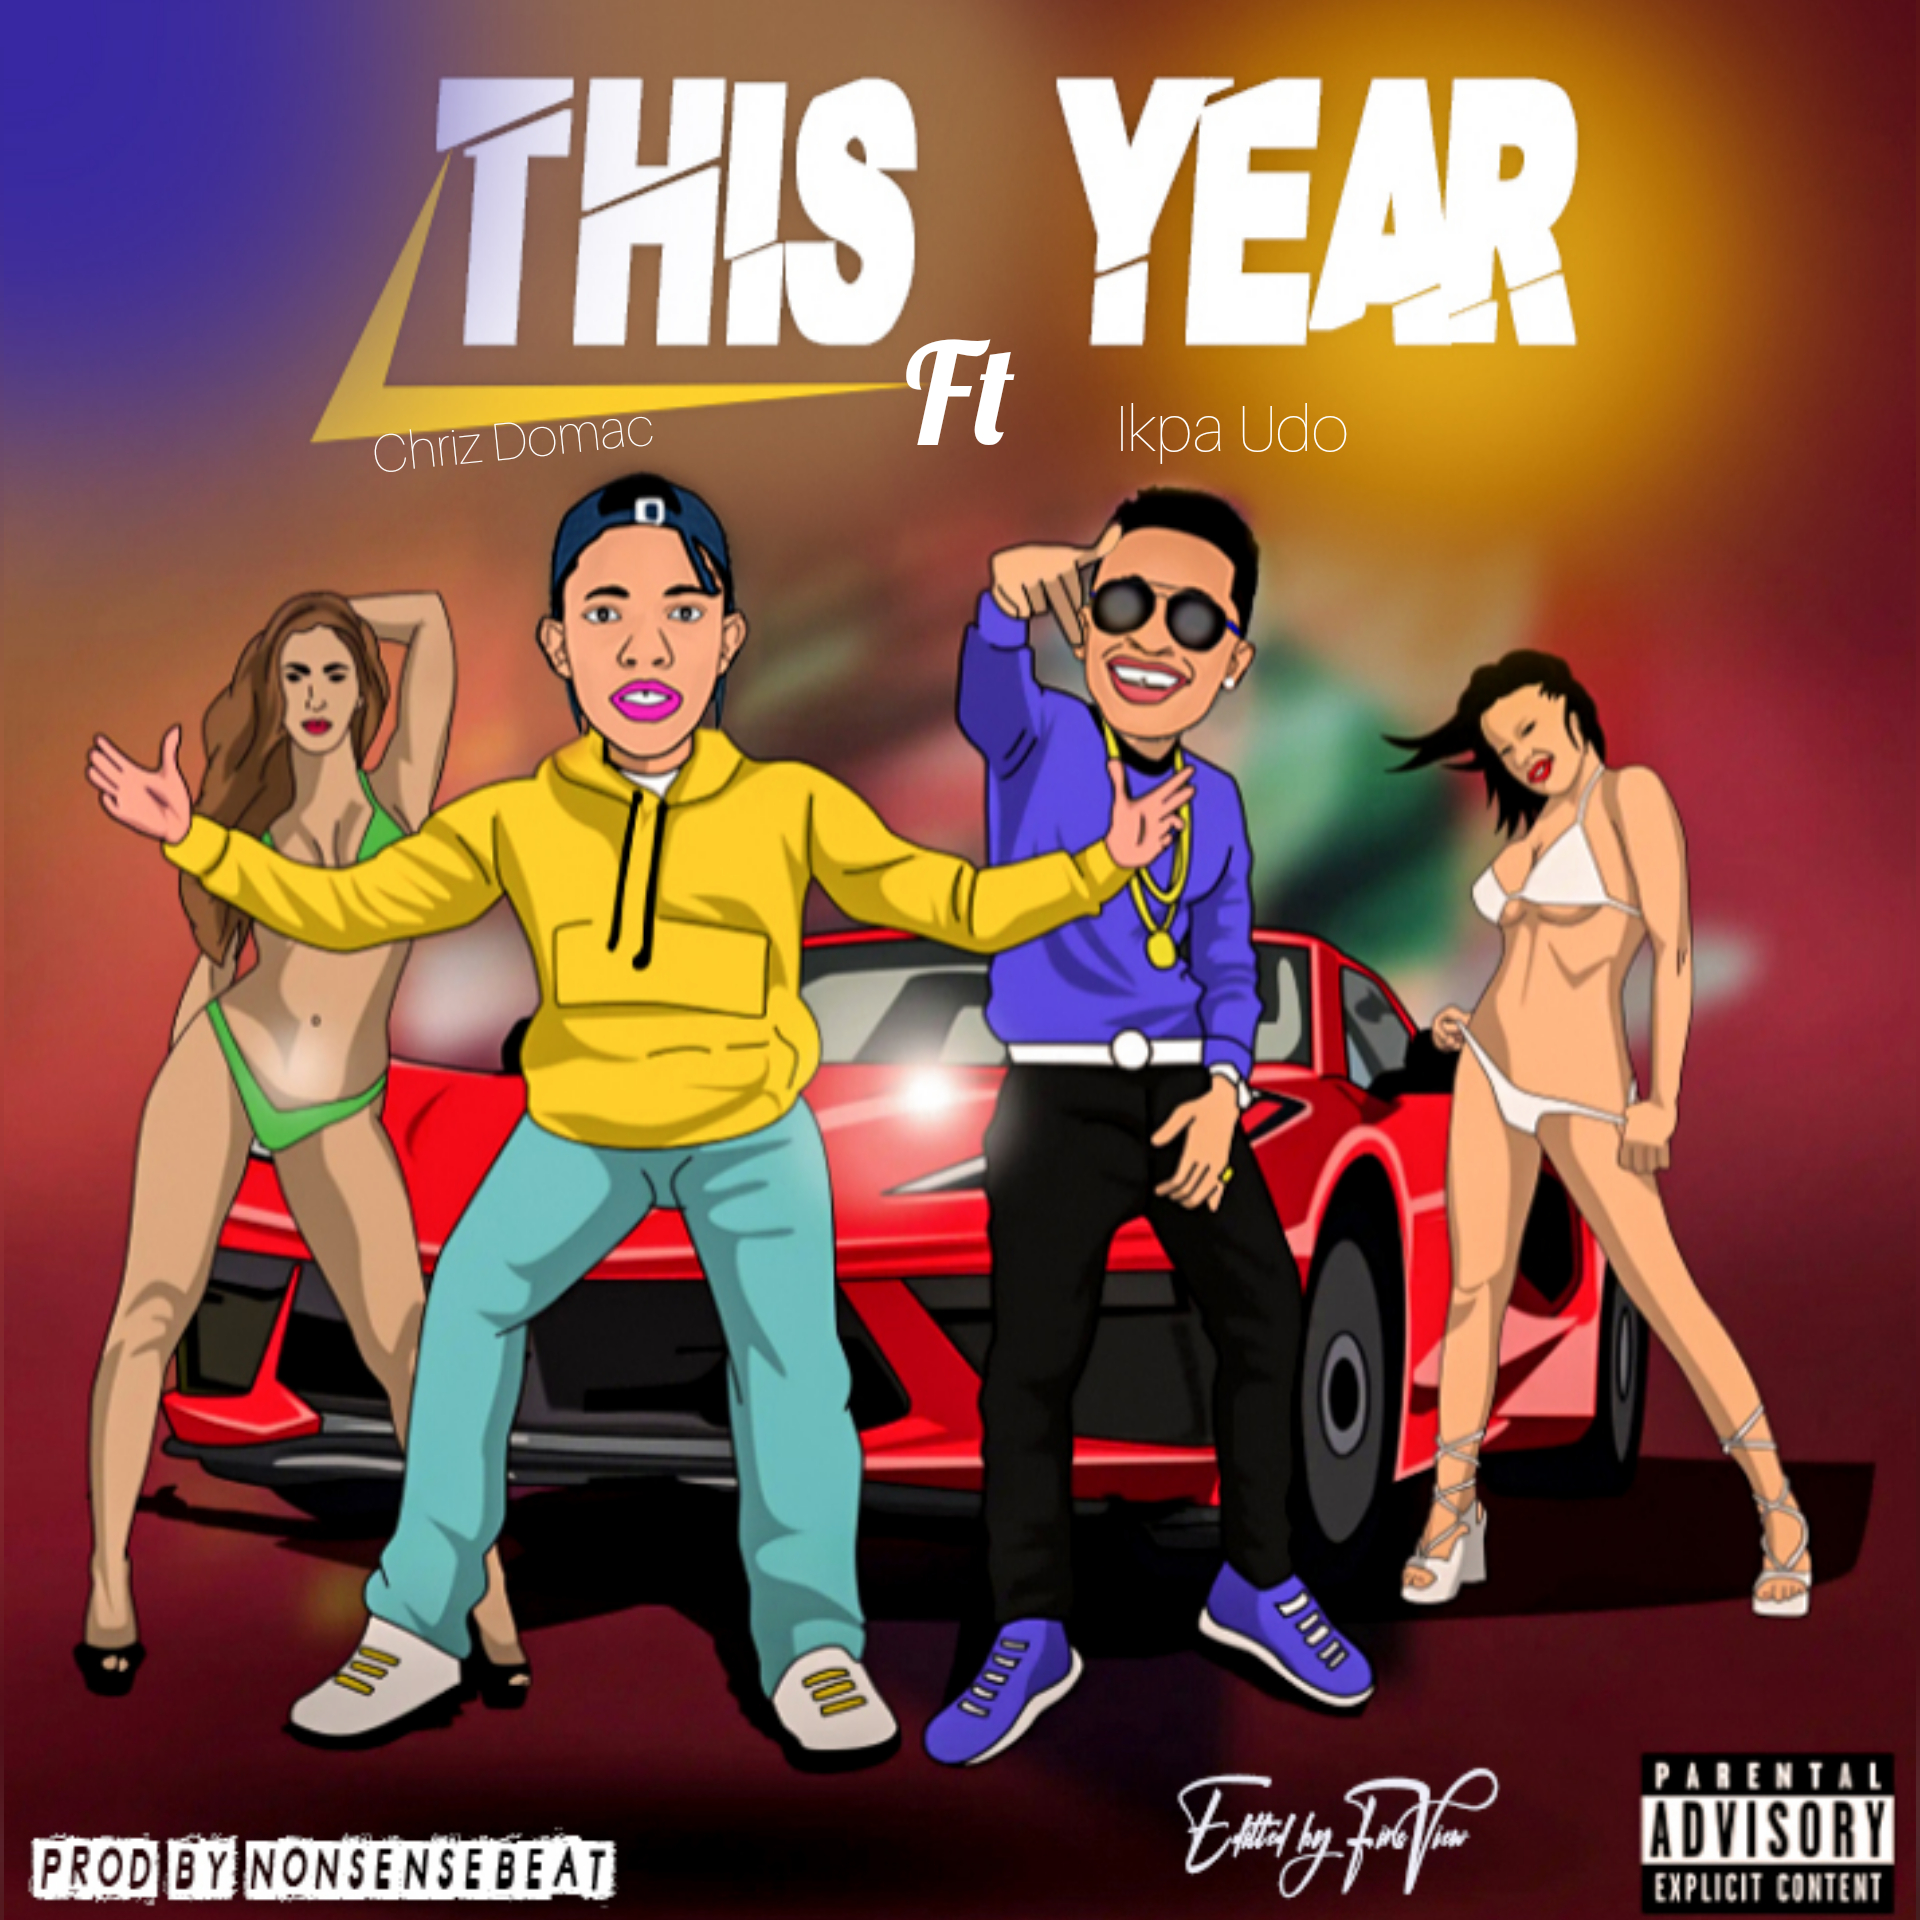 DOWNLOAD MUSIC: Chriz Domac ft Ikpa Udo – This Year